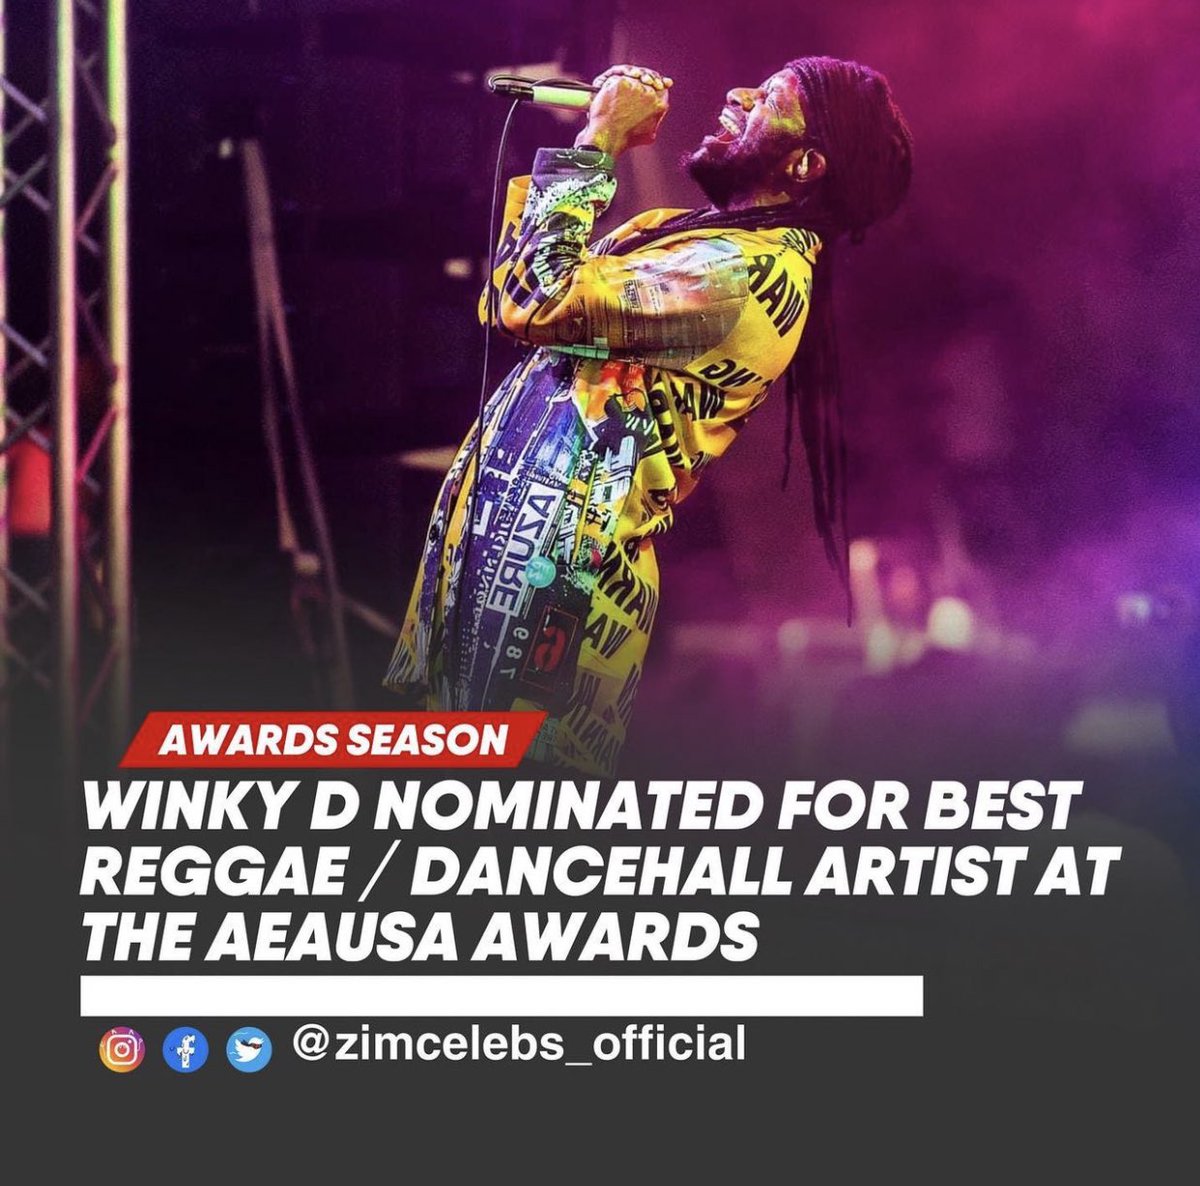 Zim wins! The Zim musical industry has won big time and Zim flag raised! Vote for both! Goats were nominated at the AEUAUSA vote.aeausa.net. Pa NUMBER 20 & 24 … musanete just scroll down